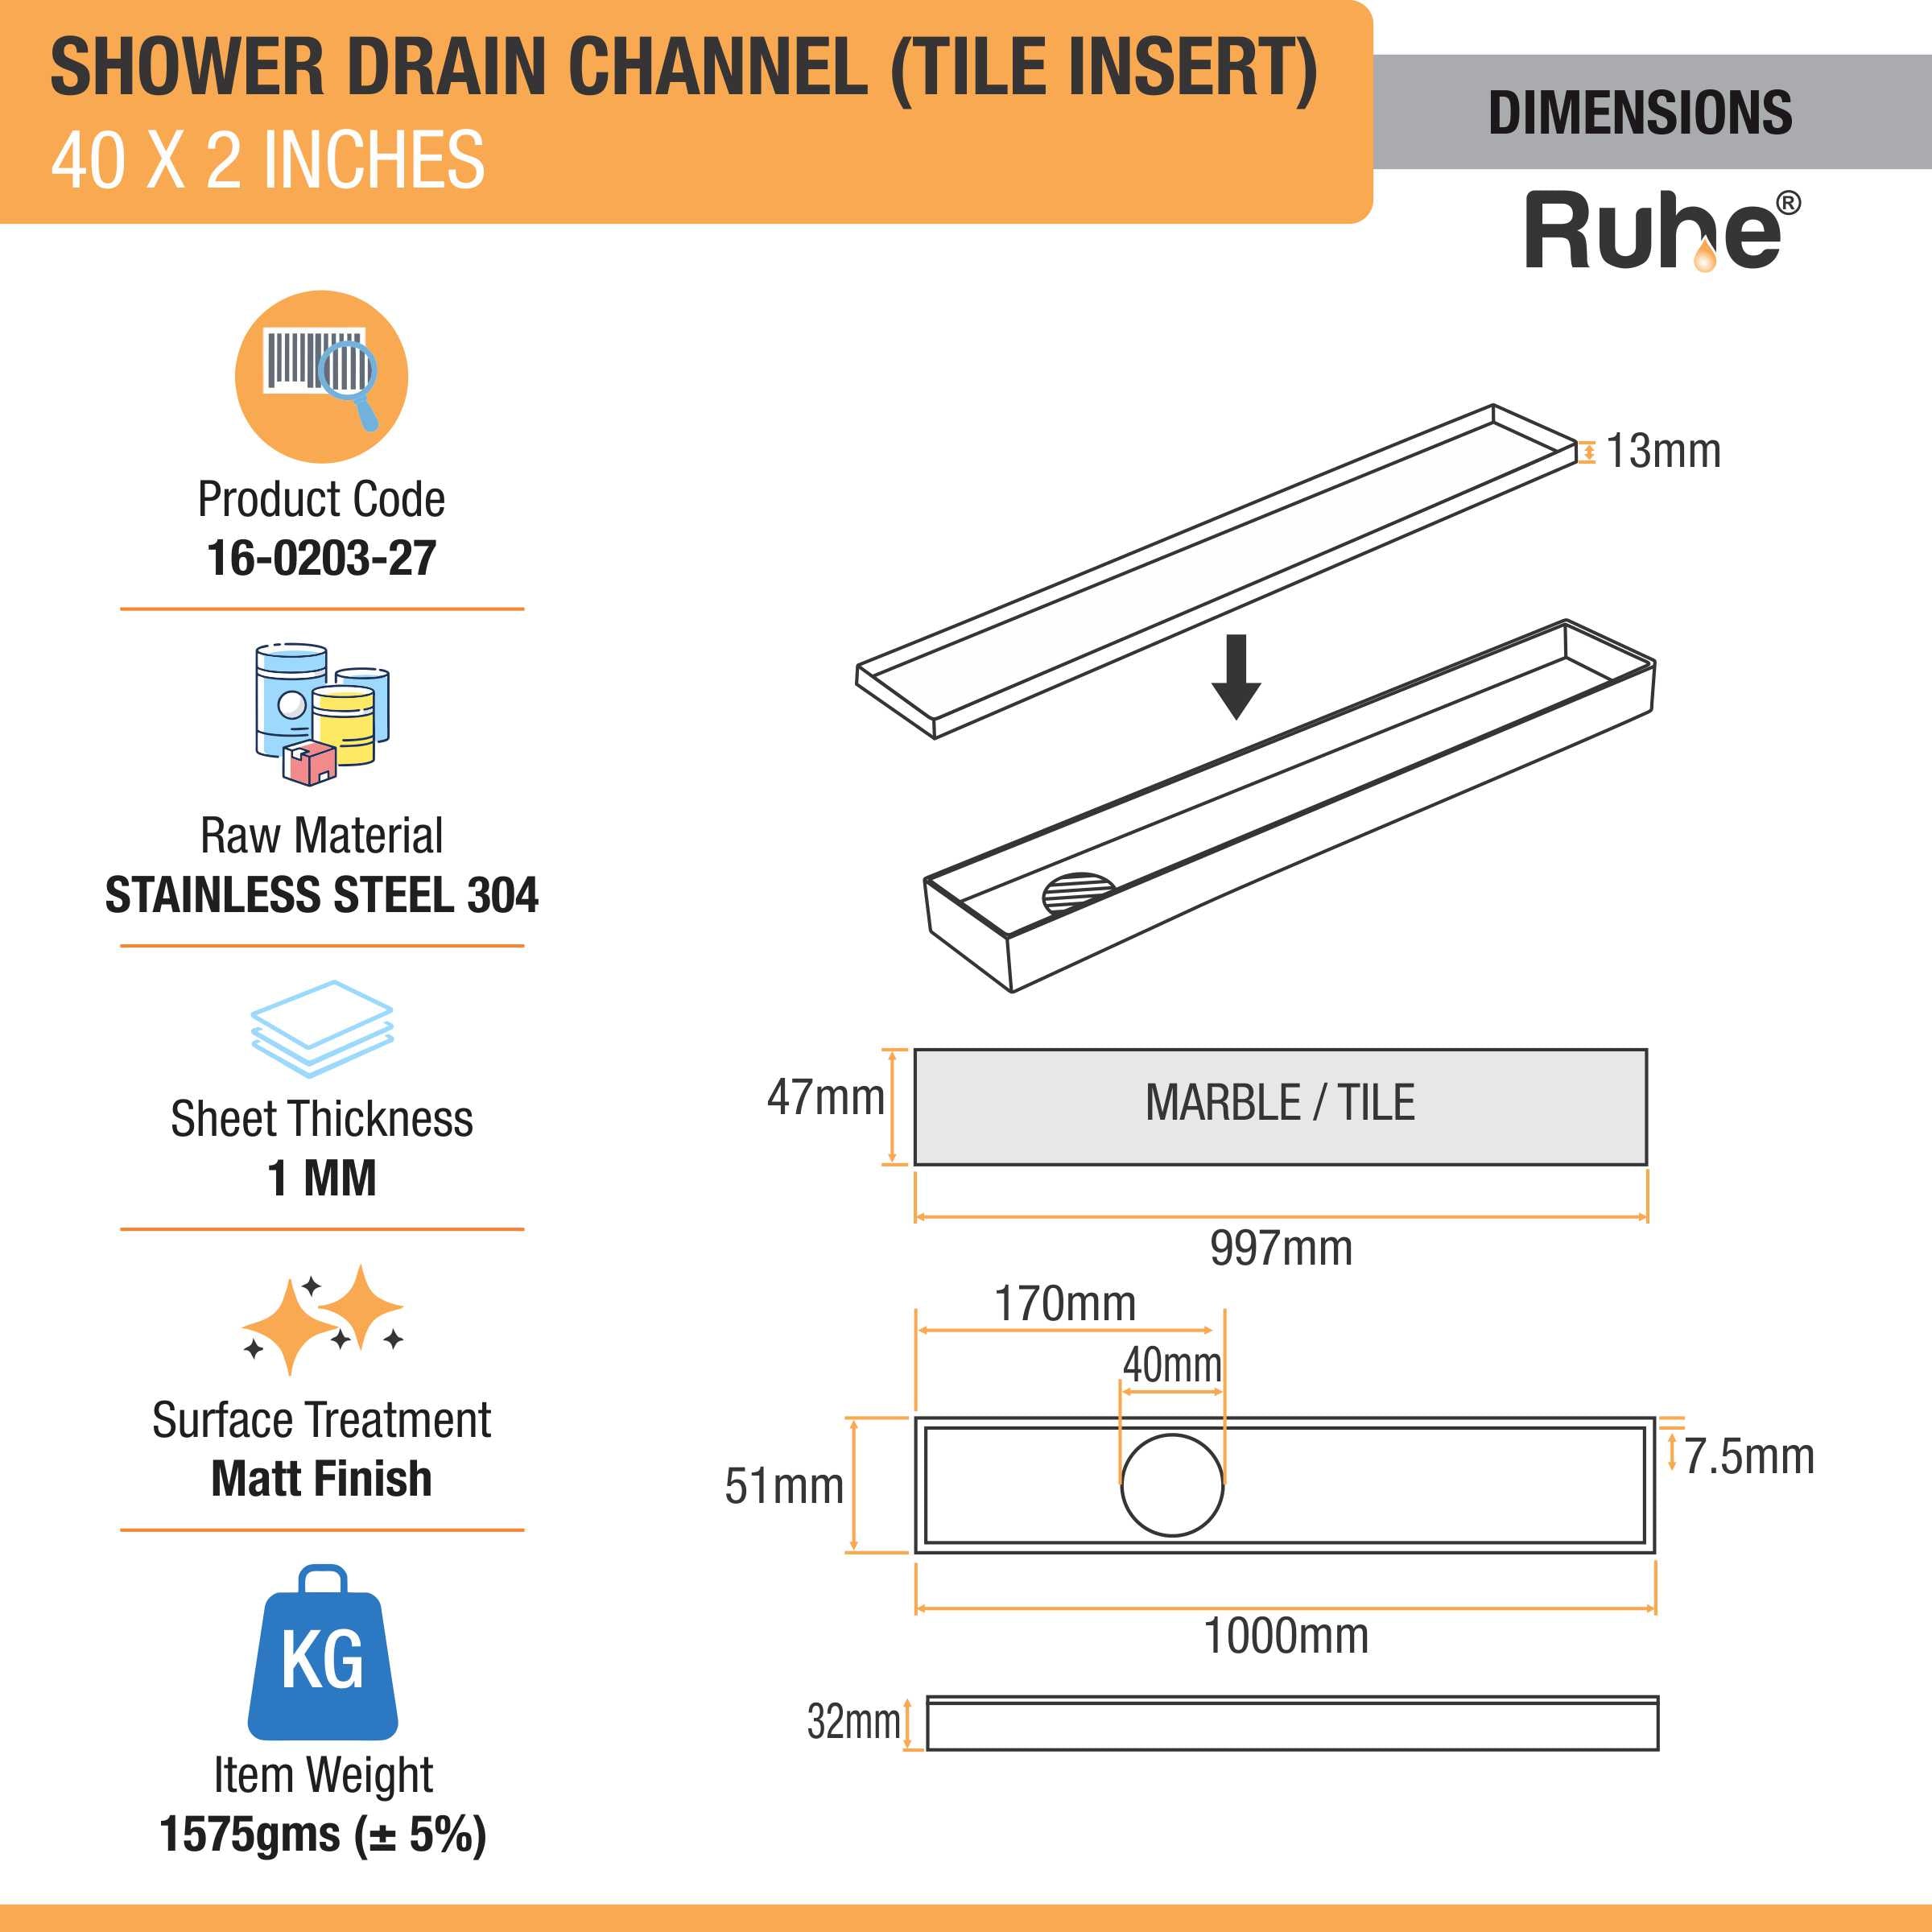 Tile Insert Shower Drain Channel (40 x 2 Inches) (304 Grade) dimensions and size